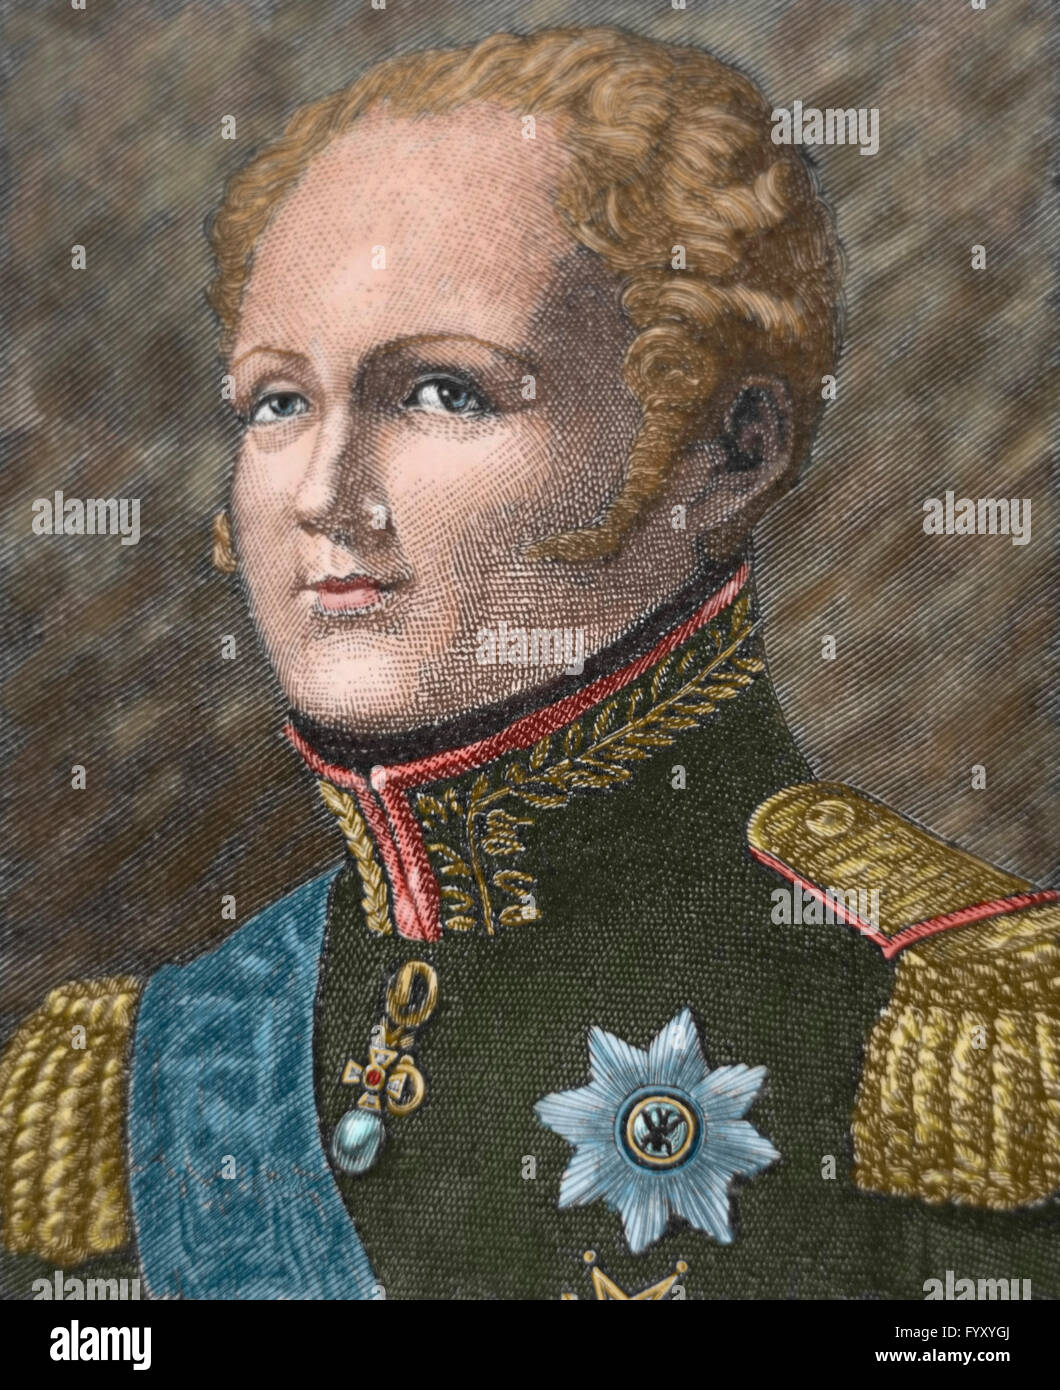 Alexander I of Rusia (1777-1825). Emperor of Russia (1801-1825), the first King of Poland (1815-1825) and the first Russian Grand Duke of Finland. Portrait. engraving. 19th century. Colored. Stock Photo